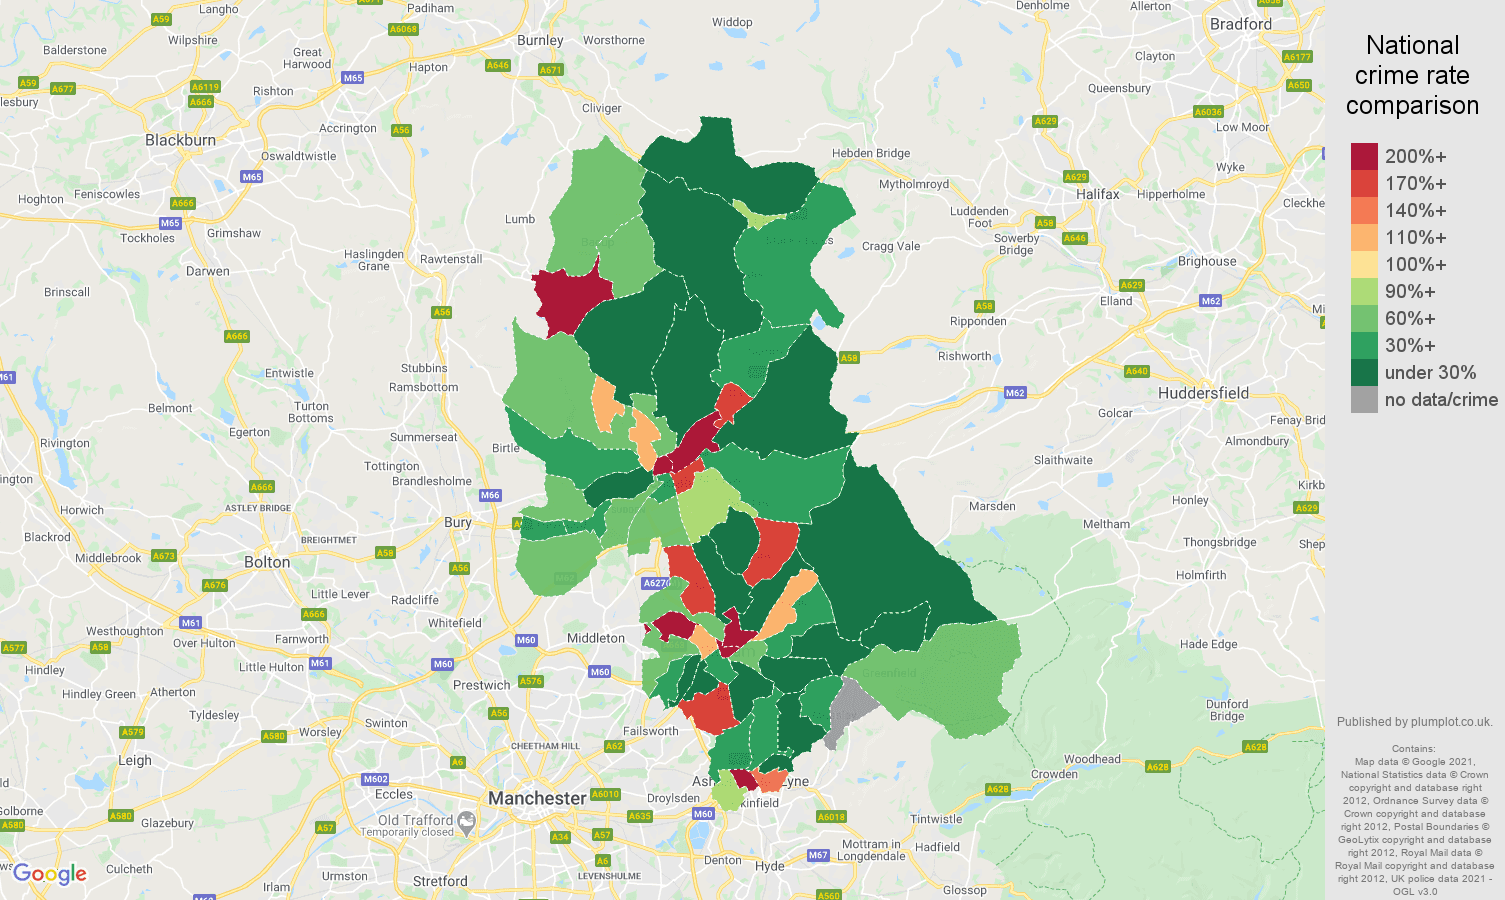 Oldham shoplifting crime rate comparison map